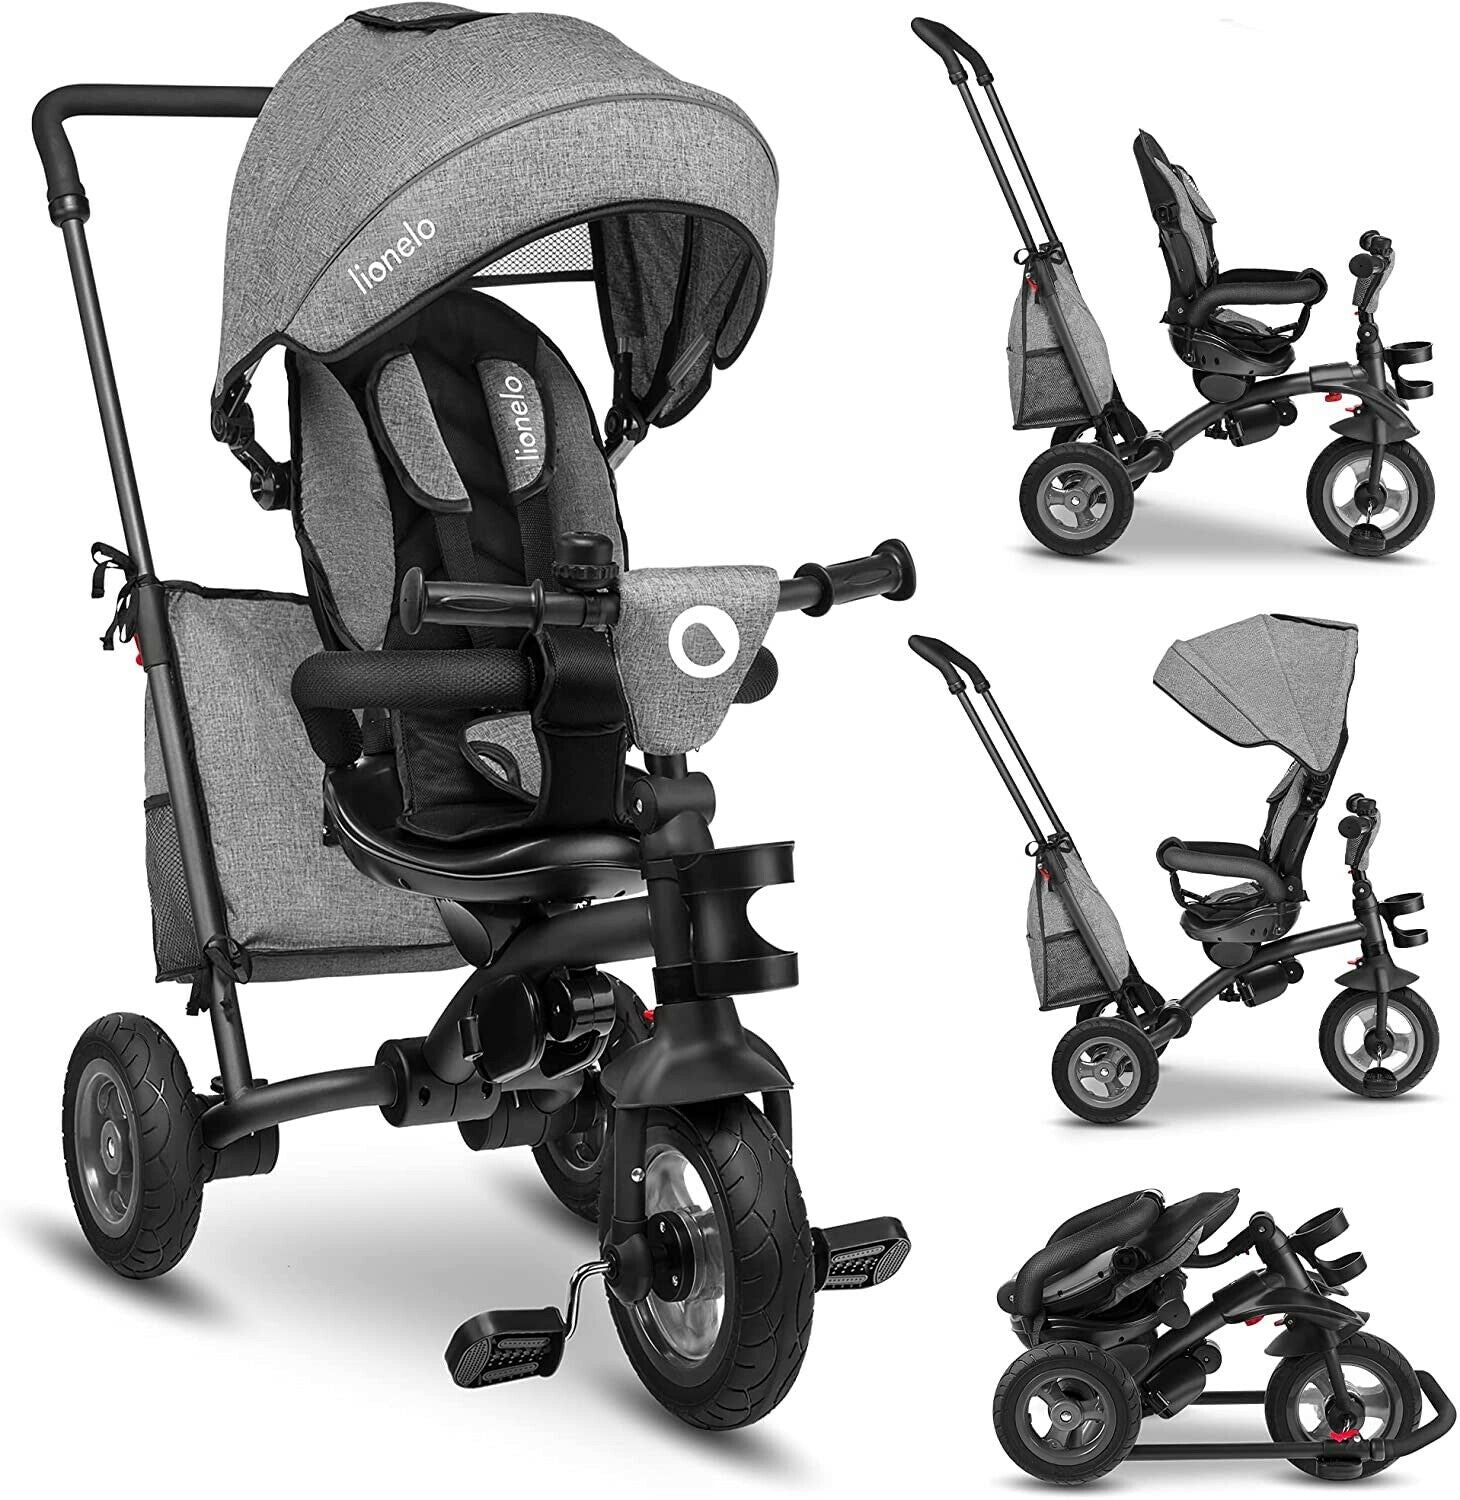 Bike Stroller Tricycle With Bag Lionelo Tris Stone Grey 2 In 1